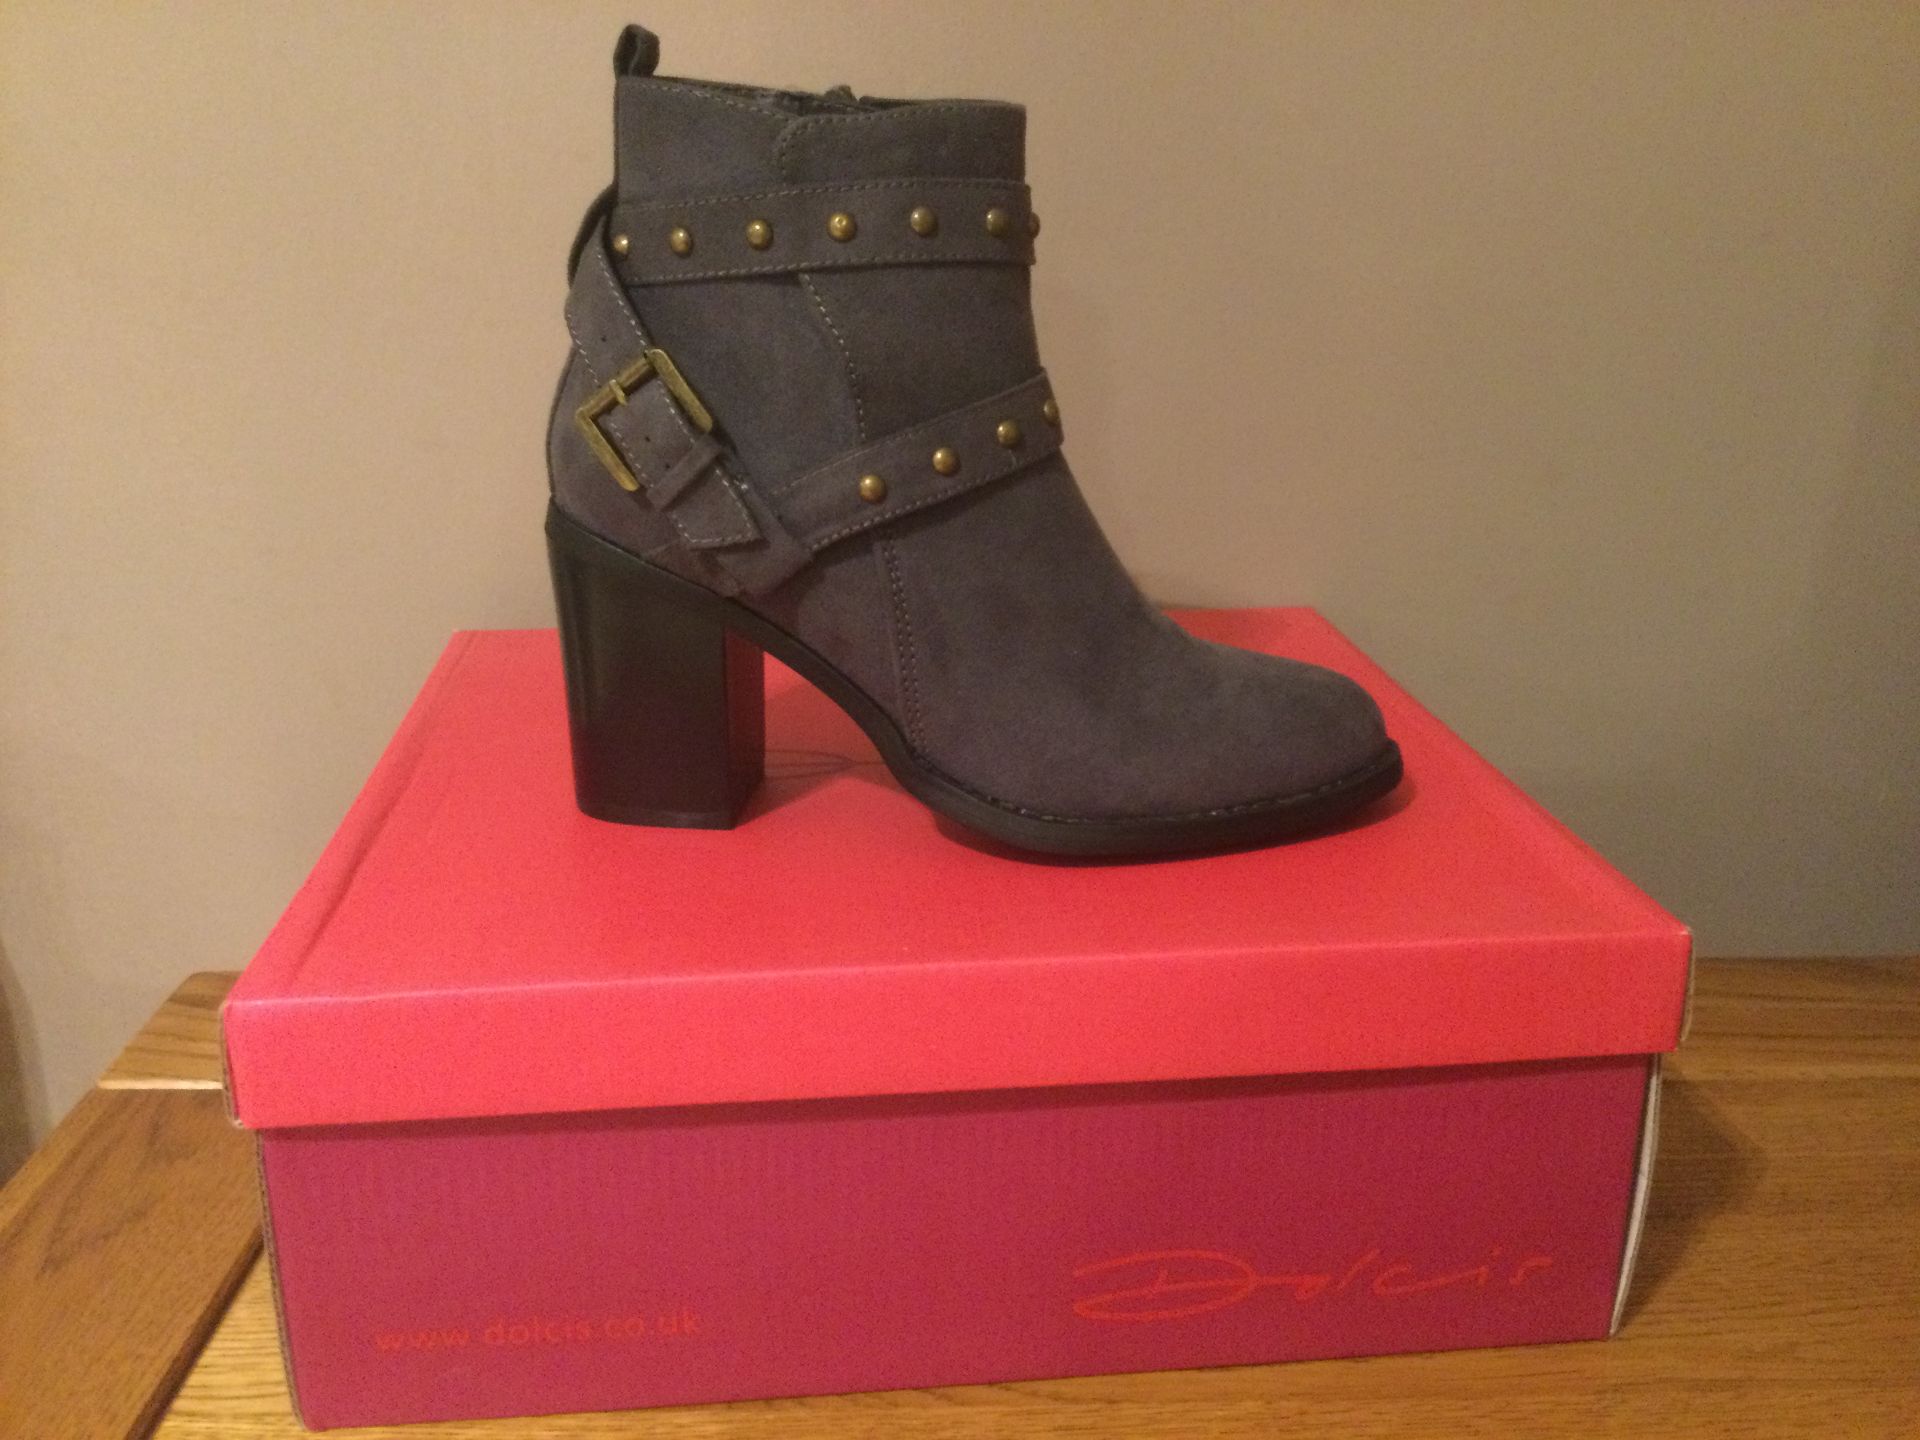 Dolcis “Piper” High Block Heel Ankle Boots, Size 7, Grey - New RRP £49.99 - Image 3 of 6